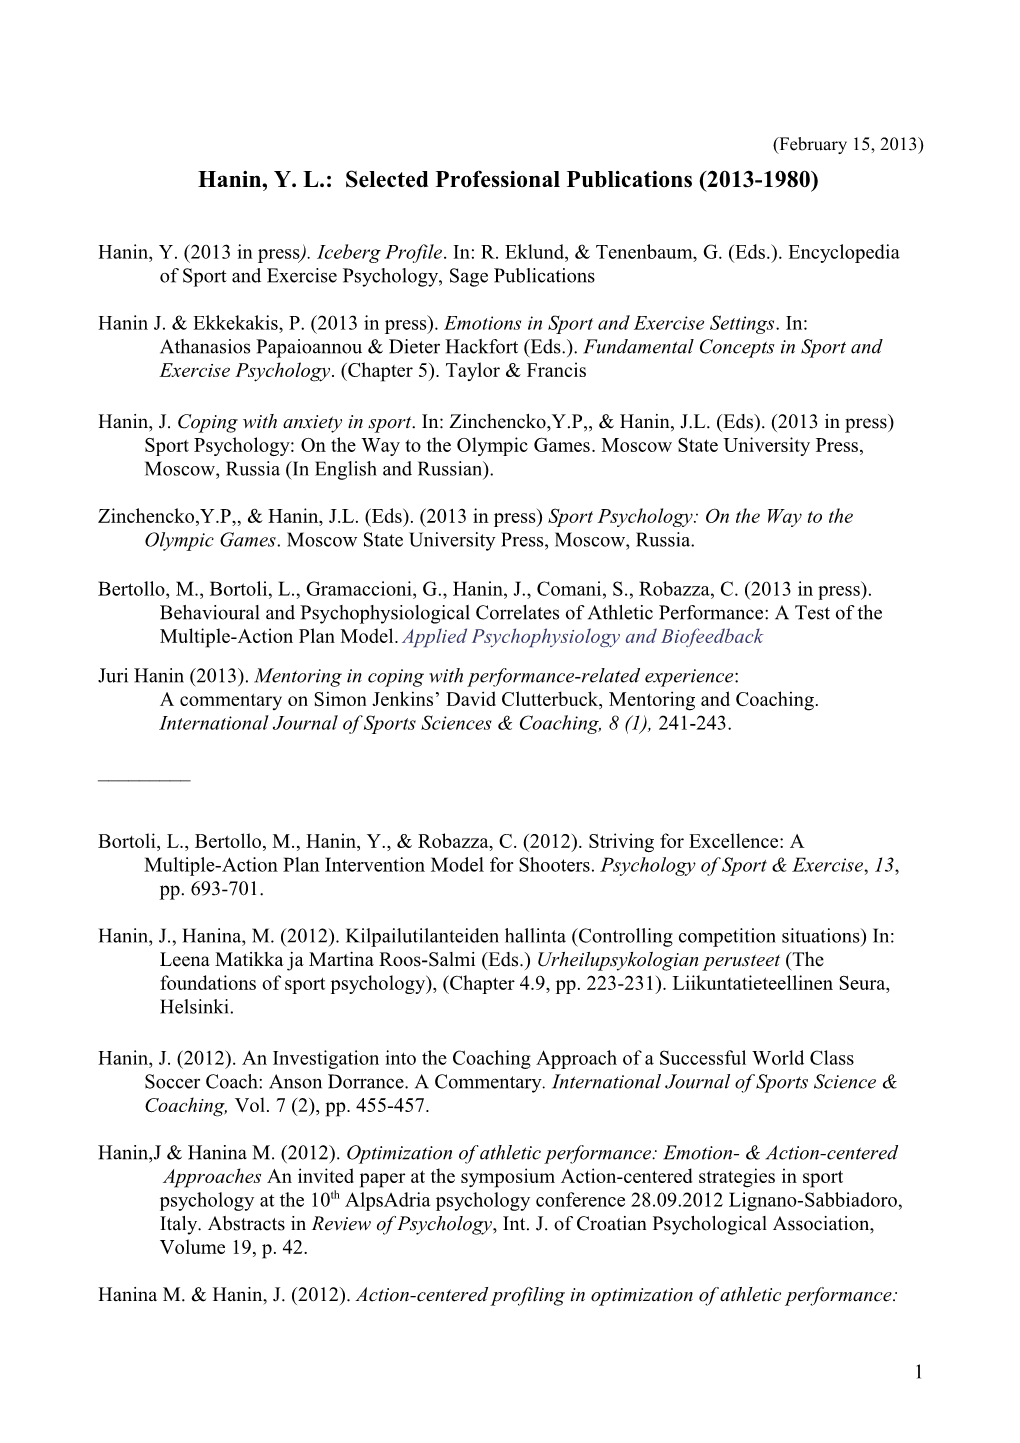 Selected Professional Publications (2000-1980)